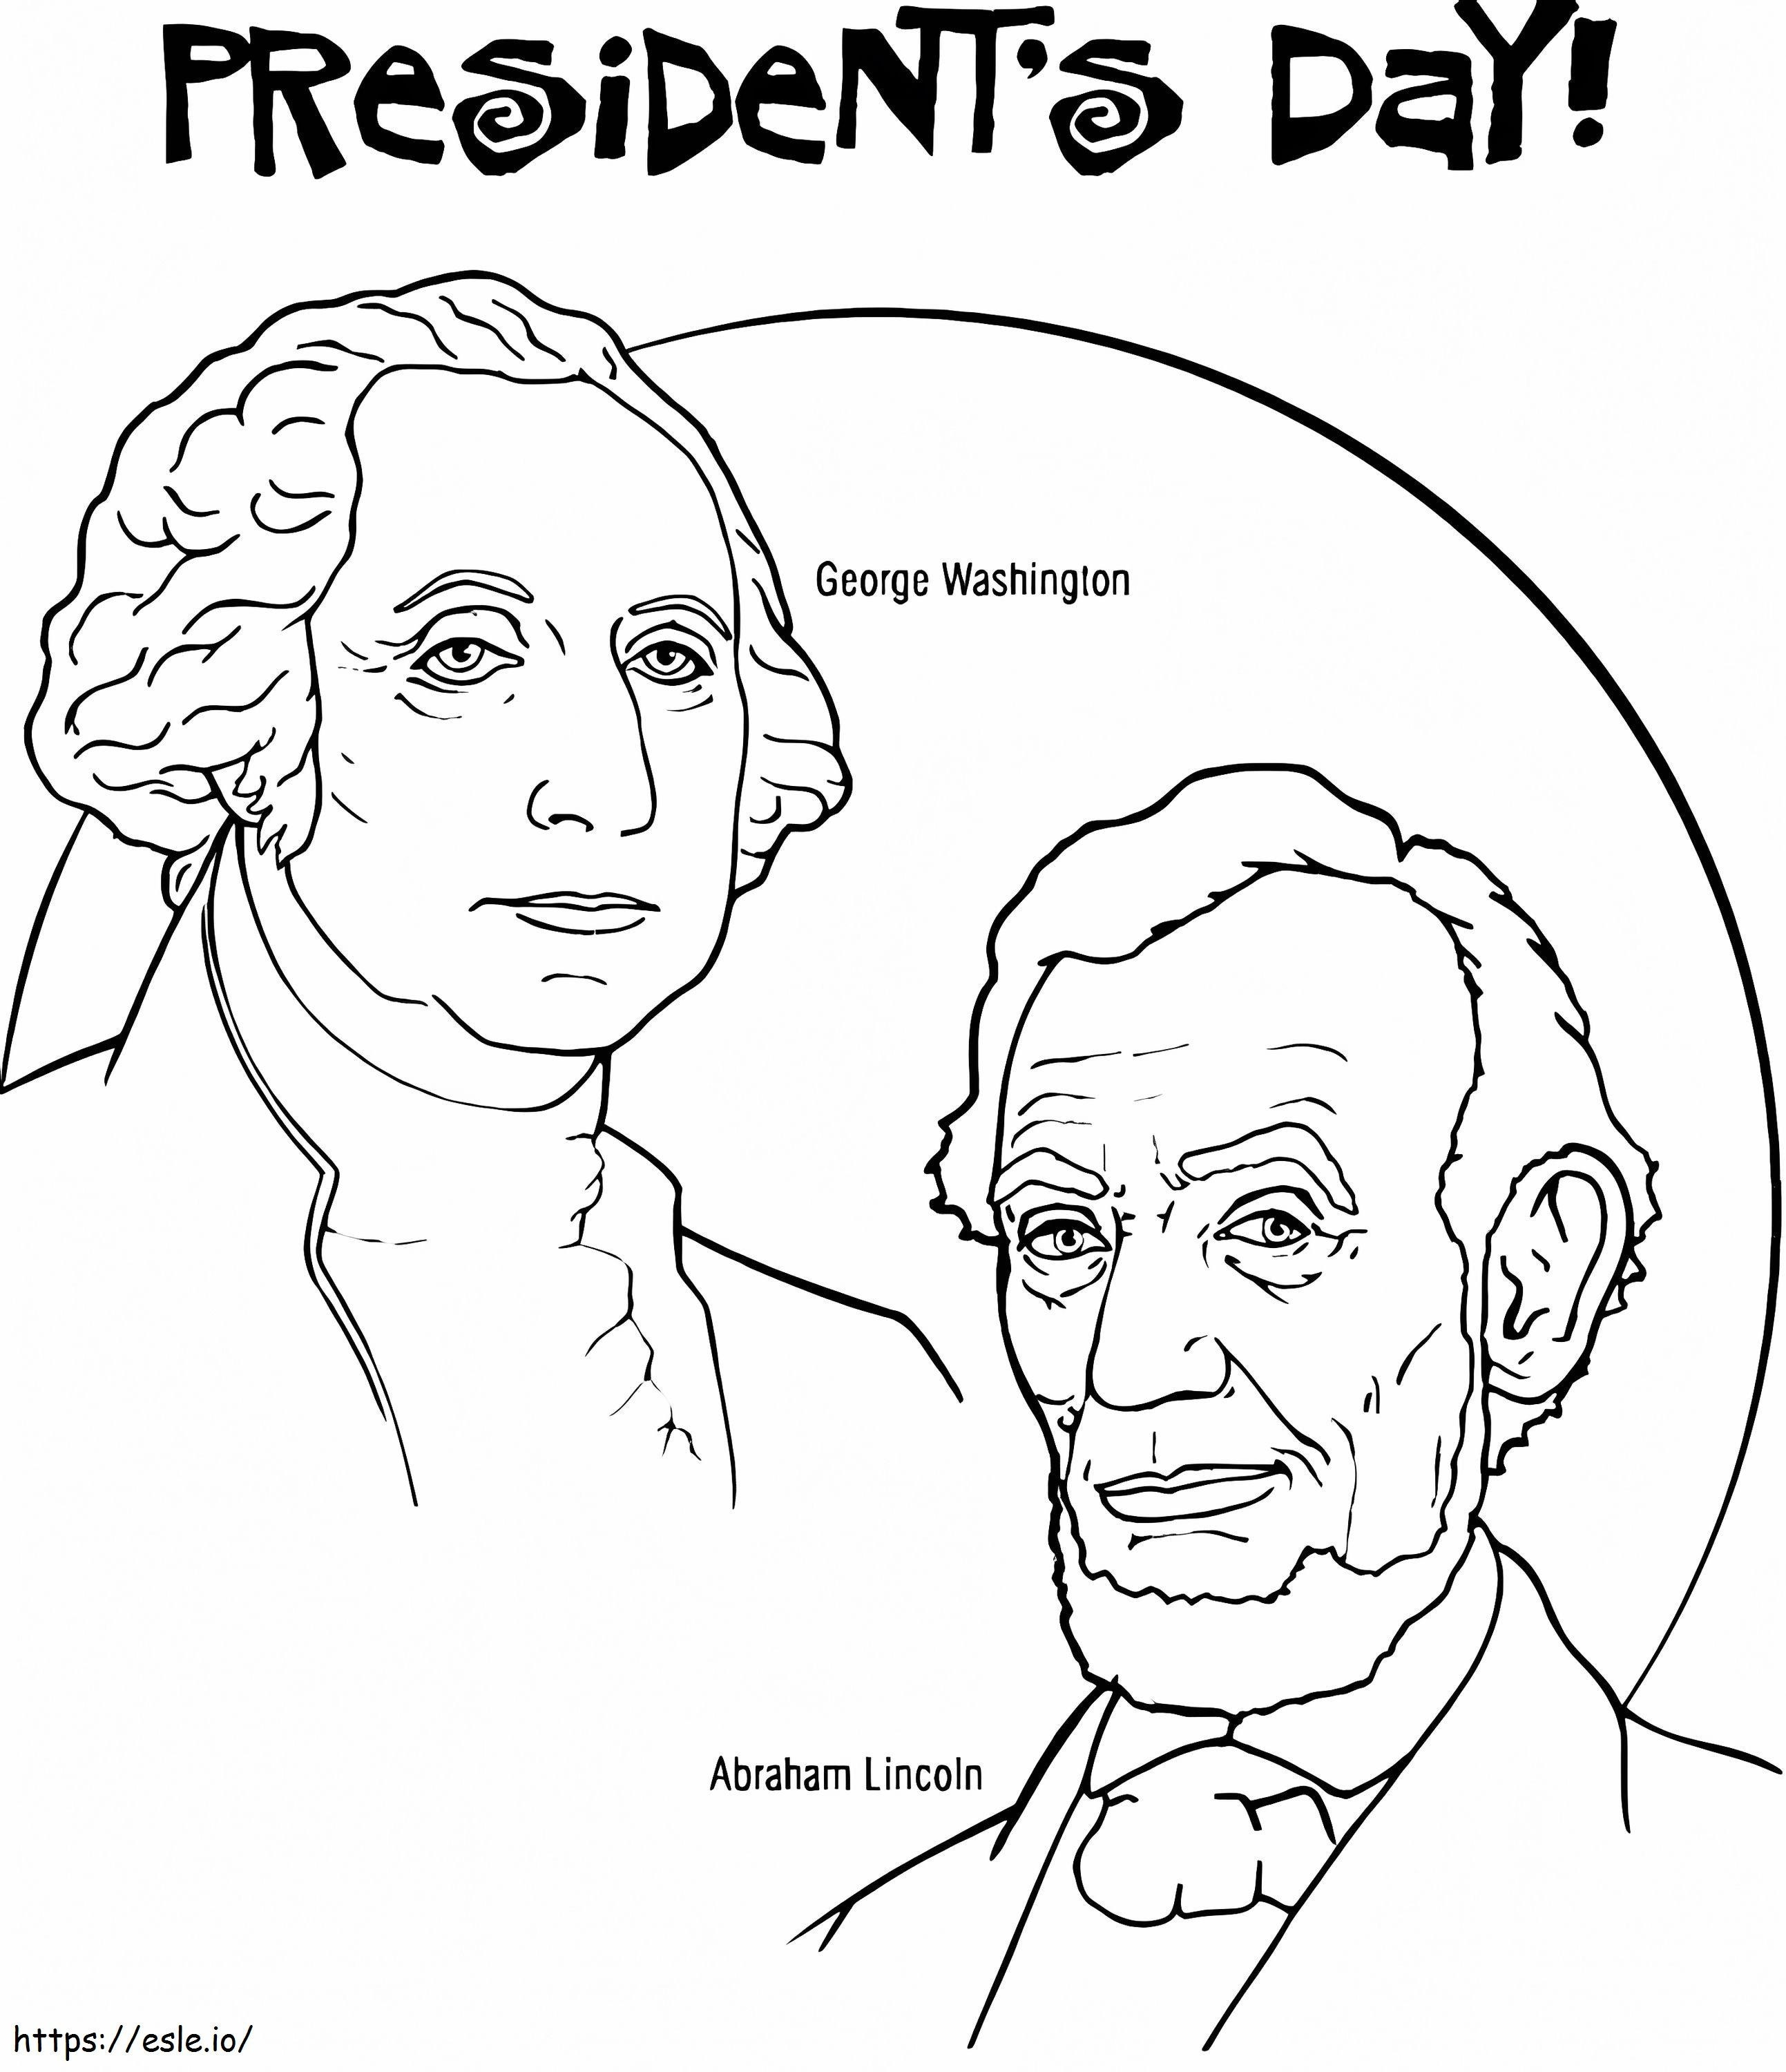 washington-and-lincoln-presidents-day-coloring-page